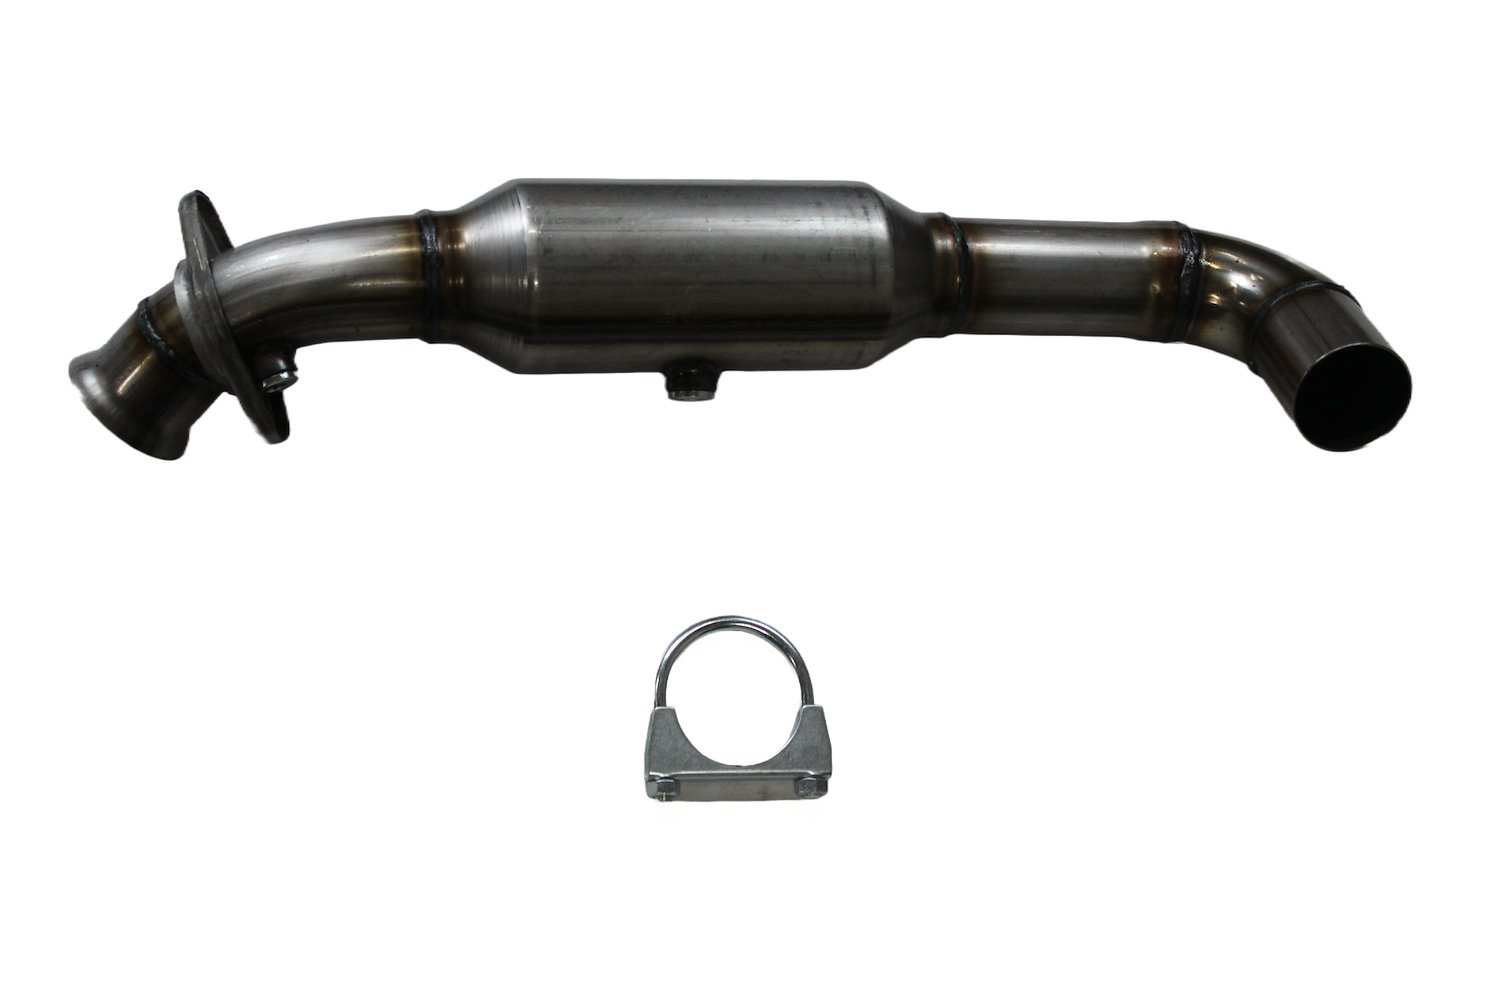 Catalytic Converter Fits 2007-2014 Ford Expedition, Lincoln Navigator, 2009-2010 Ford F-150 w/4.6L, 5.4L V8 [Left/Driver Side]